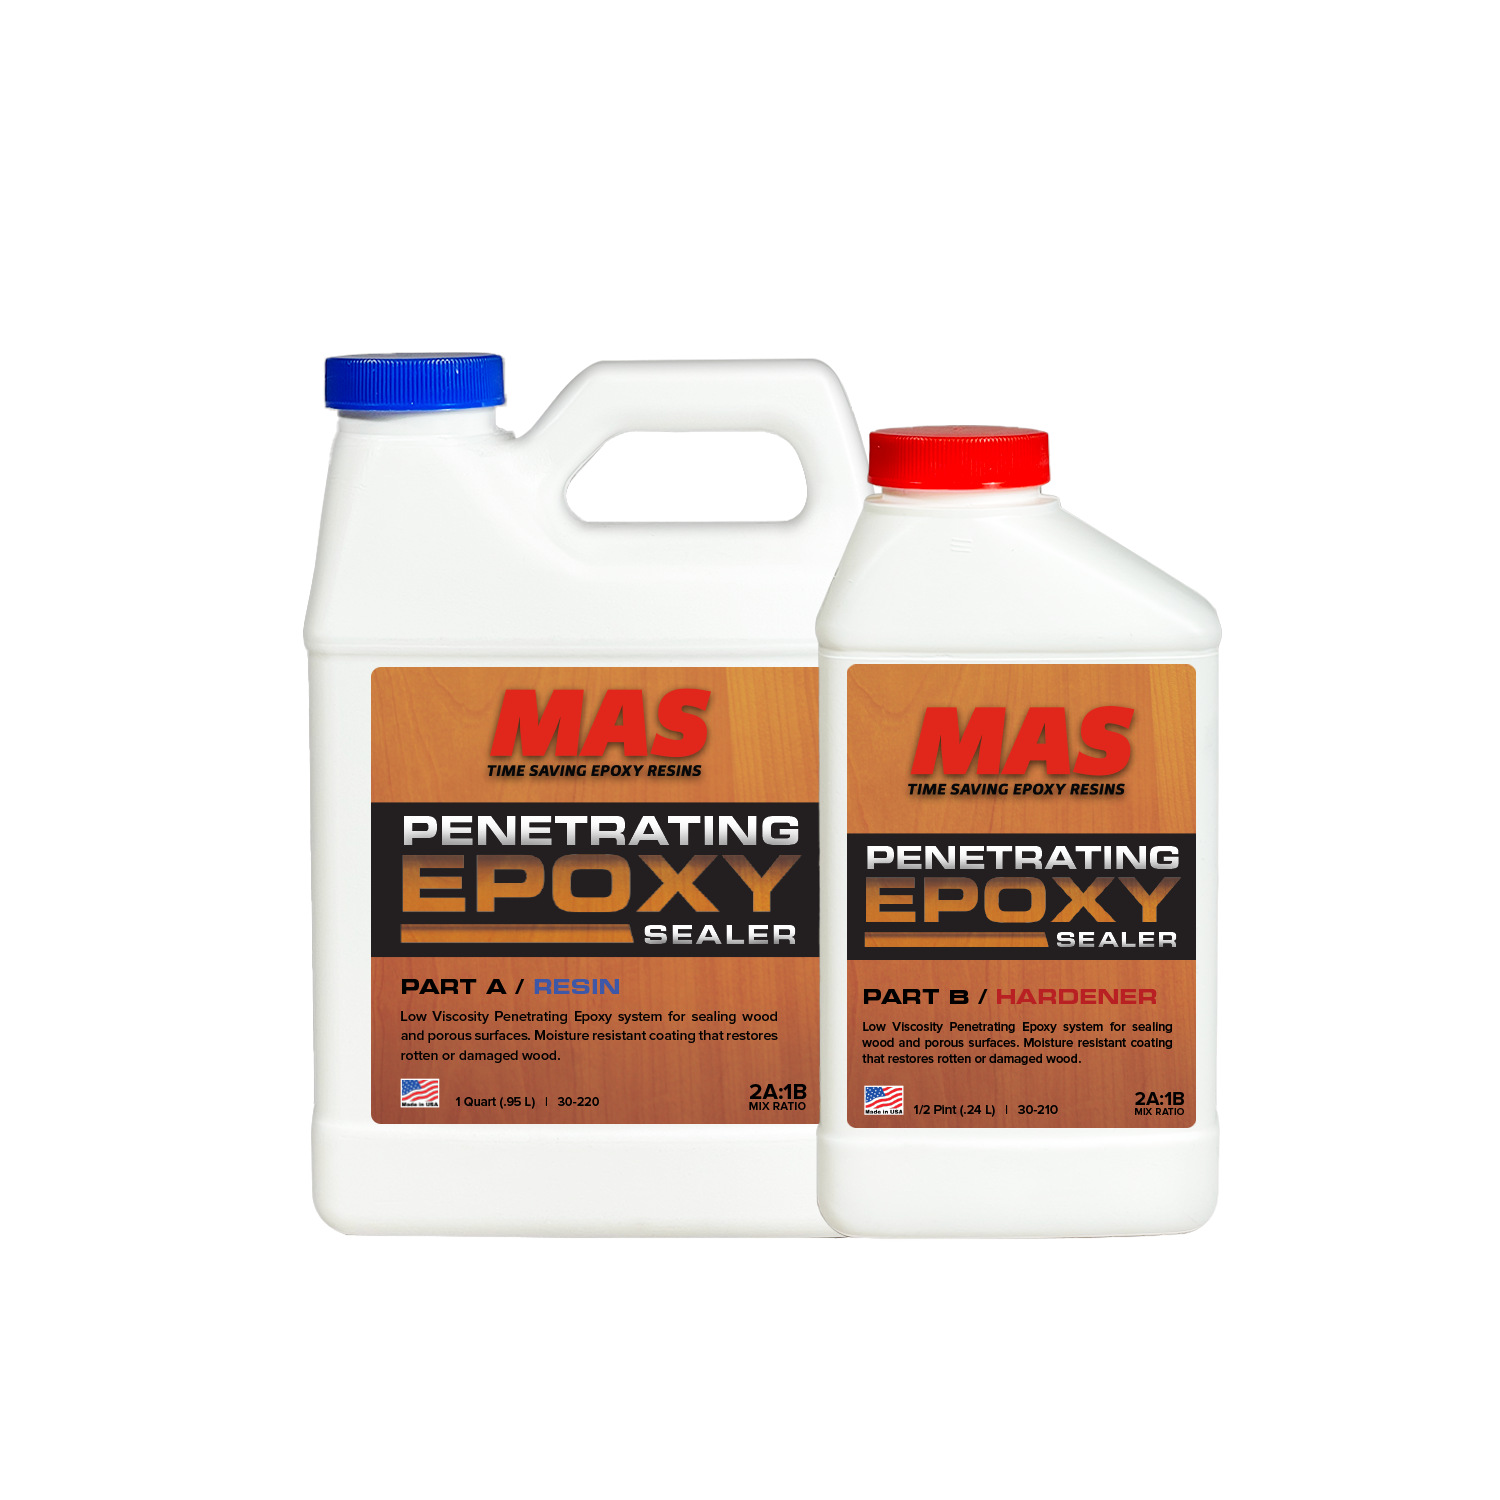 Which epoxy is best for varying depths?